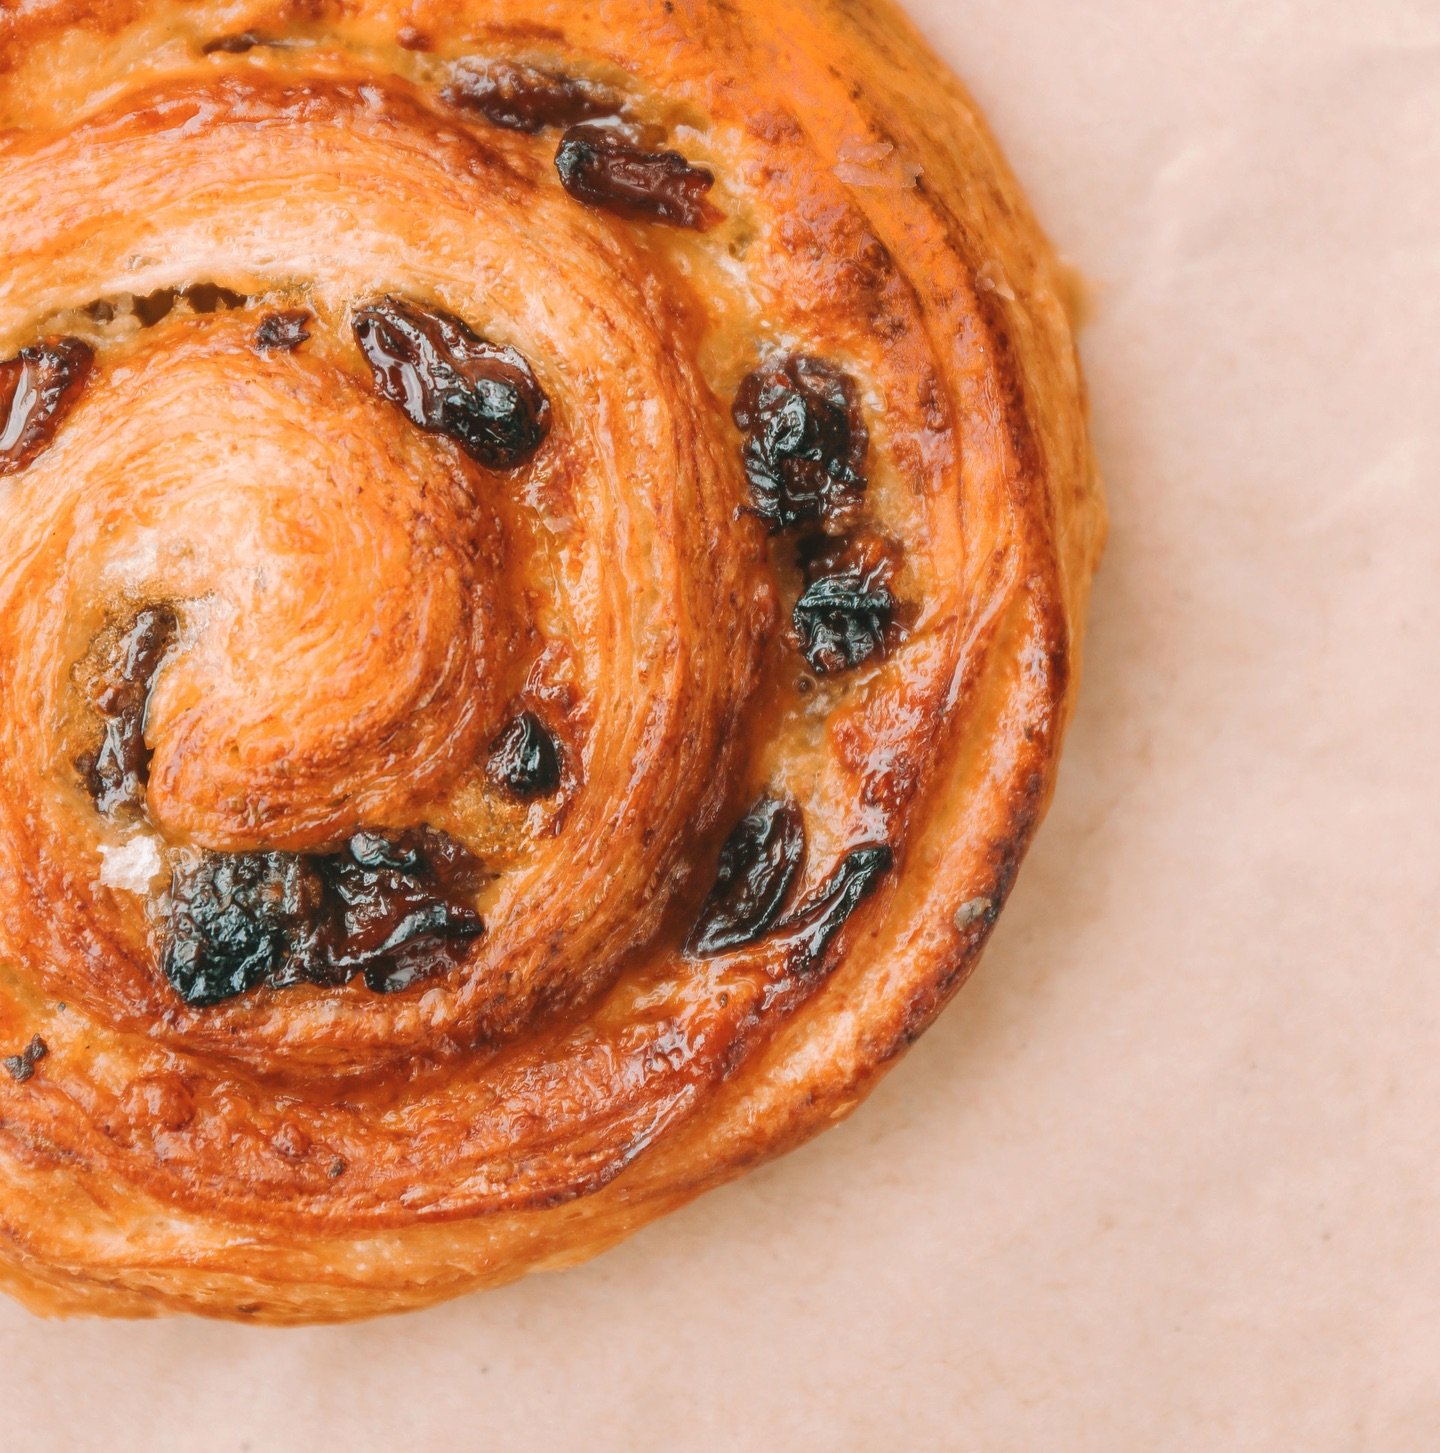 Missing your morning RISE coffee and pastry? 
Not to worry, our @risebakestore just up the road in Bridport provides takeaway @extractcoffee and our delicious @risebakes pastries! 

Not too long and we&rsquo;ll be back and serving you some good mood 